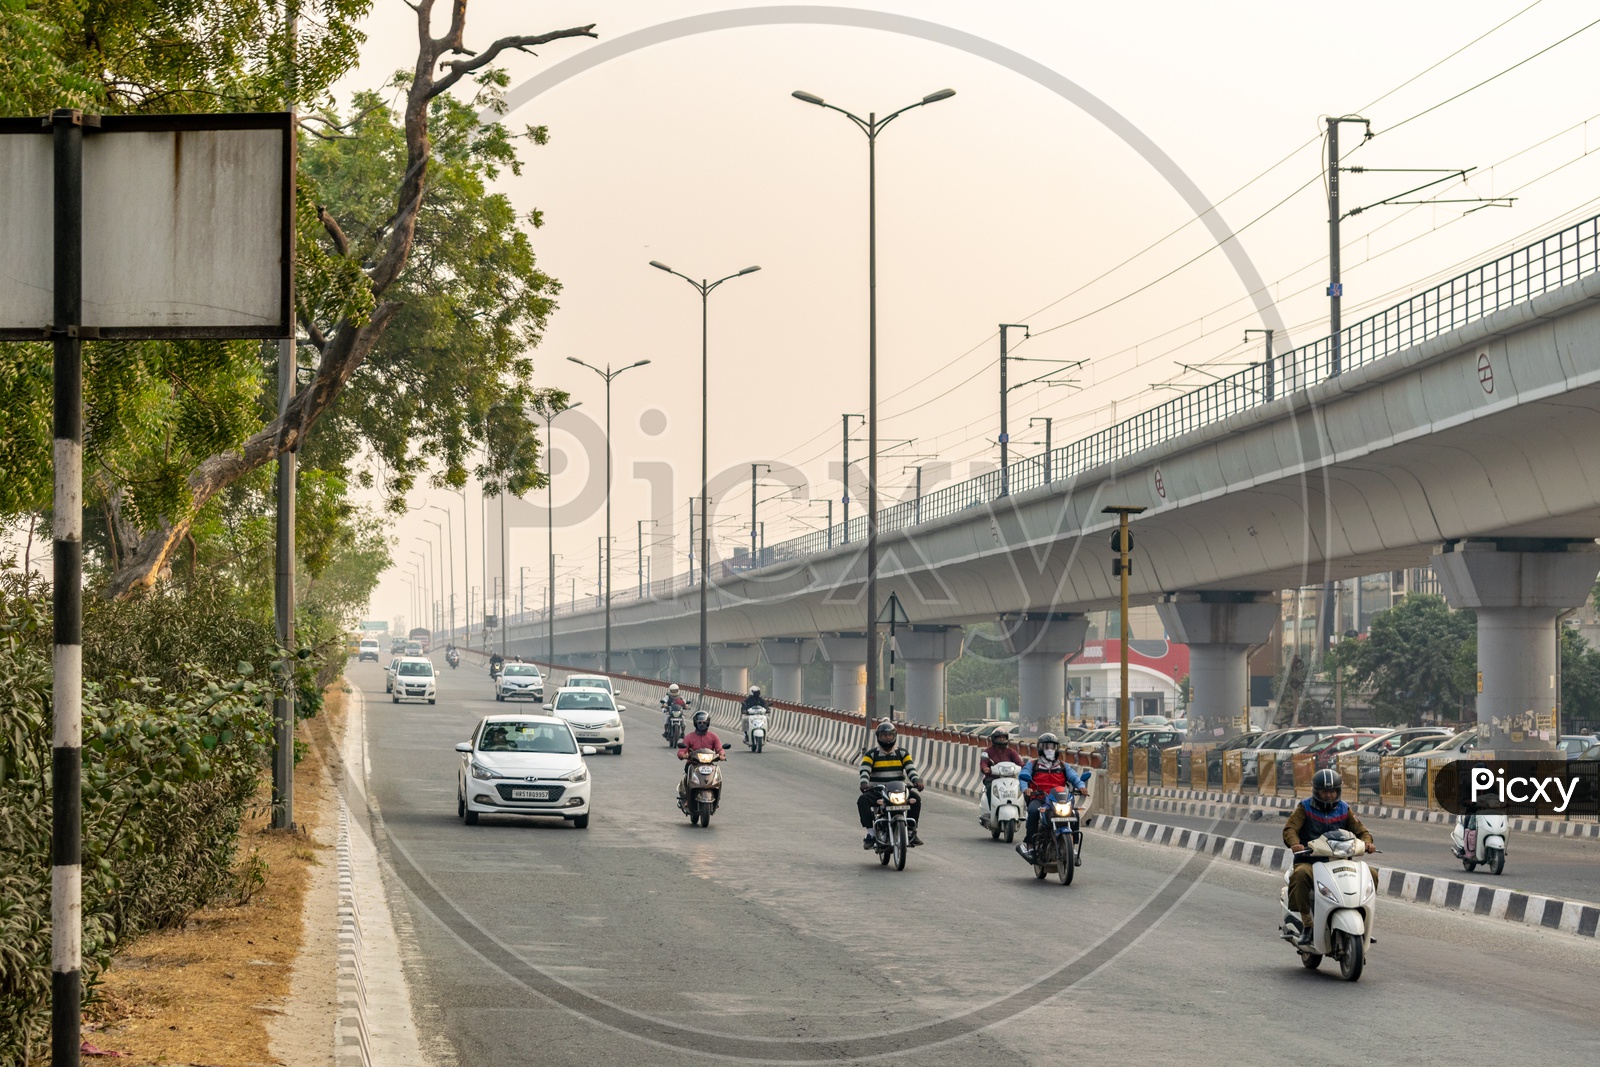 Delhi metro line and vehicles on flyover